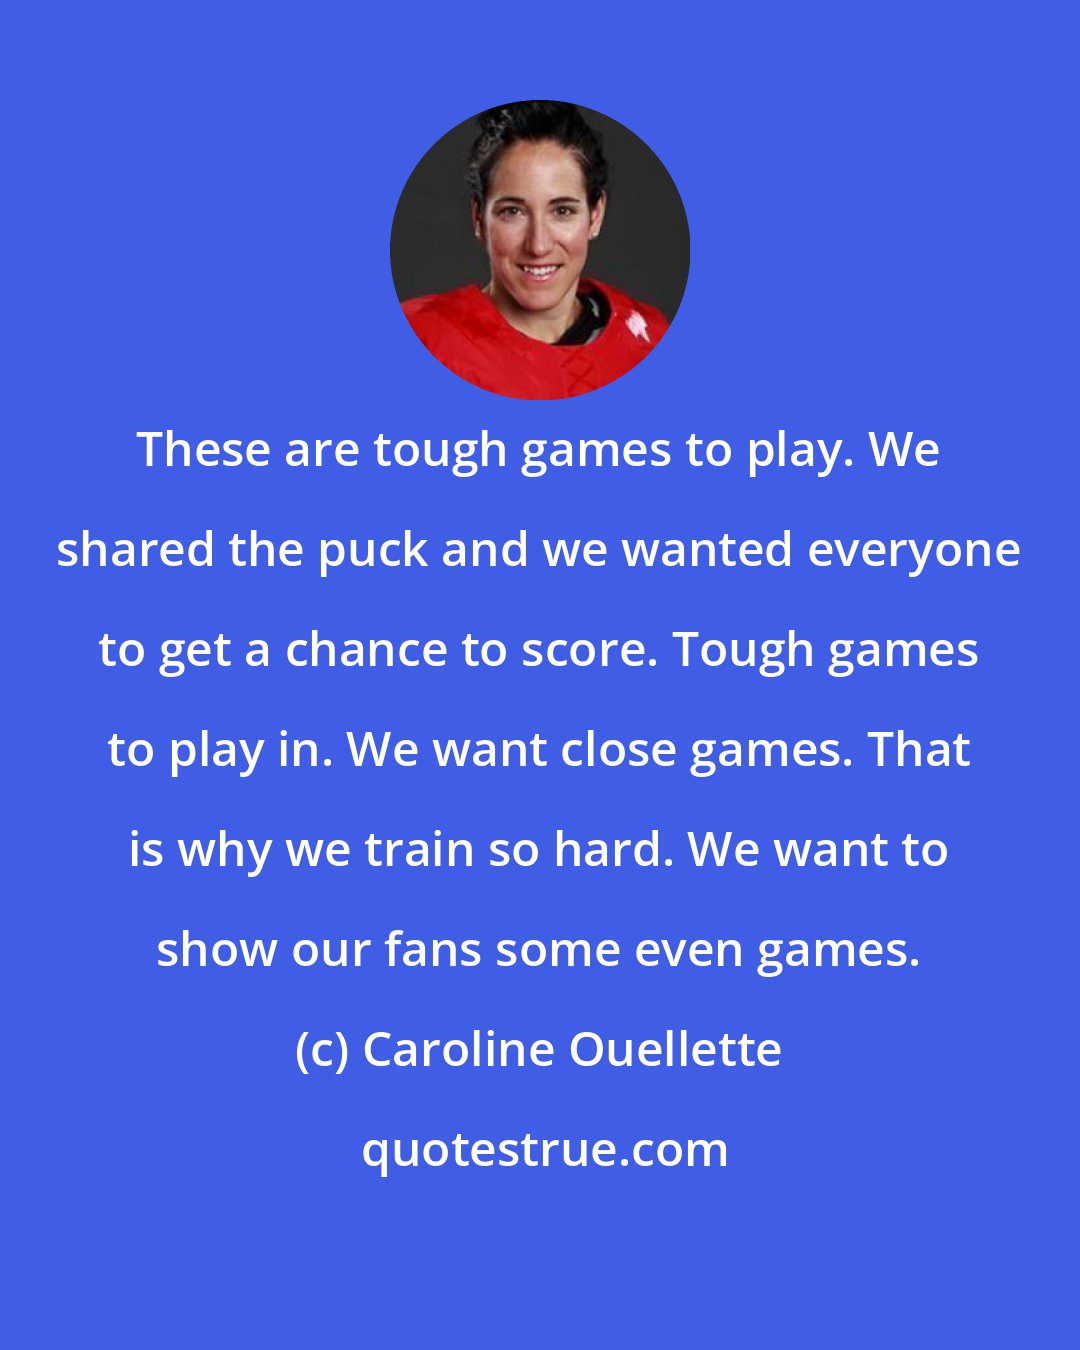 Caroline Ouellette: These are tough games to play. We shared the puck and we wanted everyone to get a chance to score. Tough games to play in. We want close games. That is why we train so hard. We want to show our fans some even games.